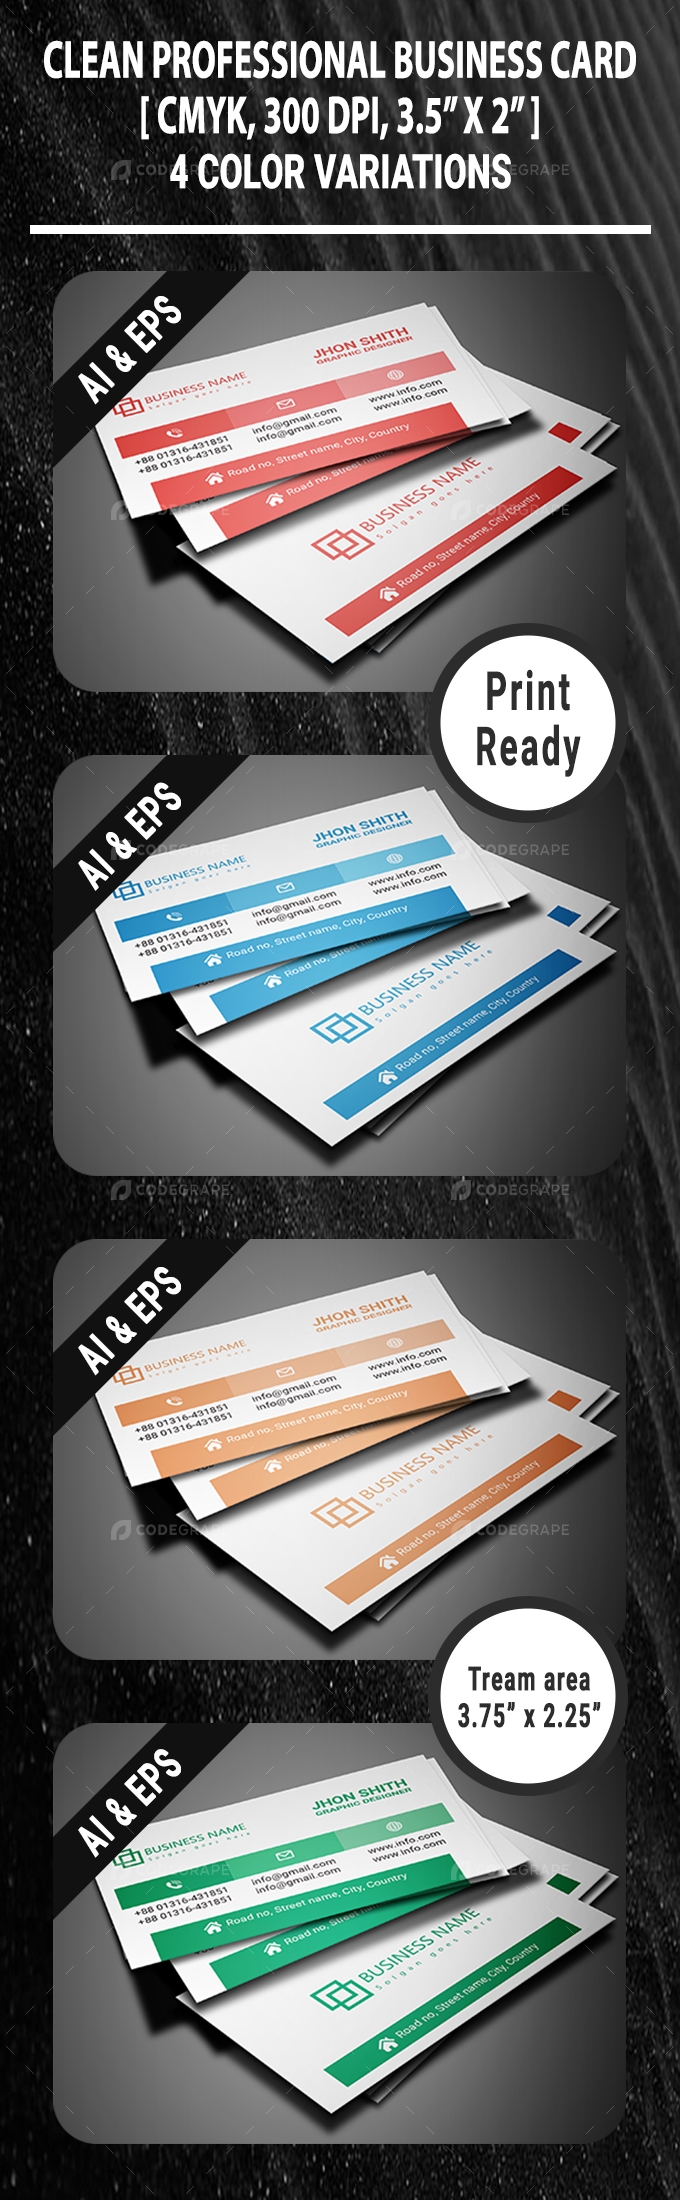 Clean Professional Business Card